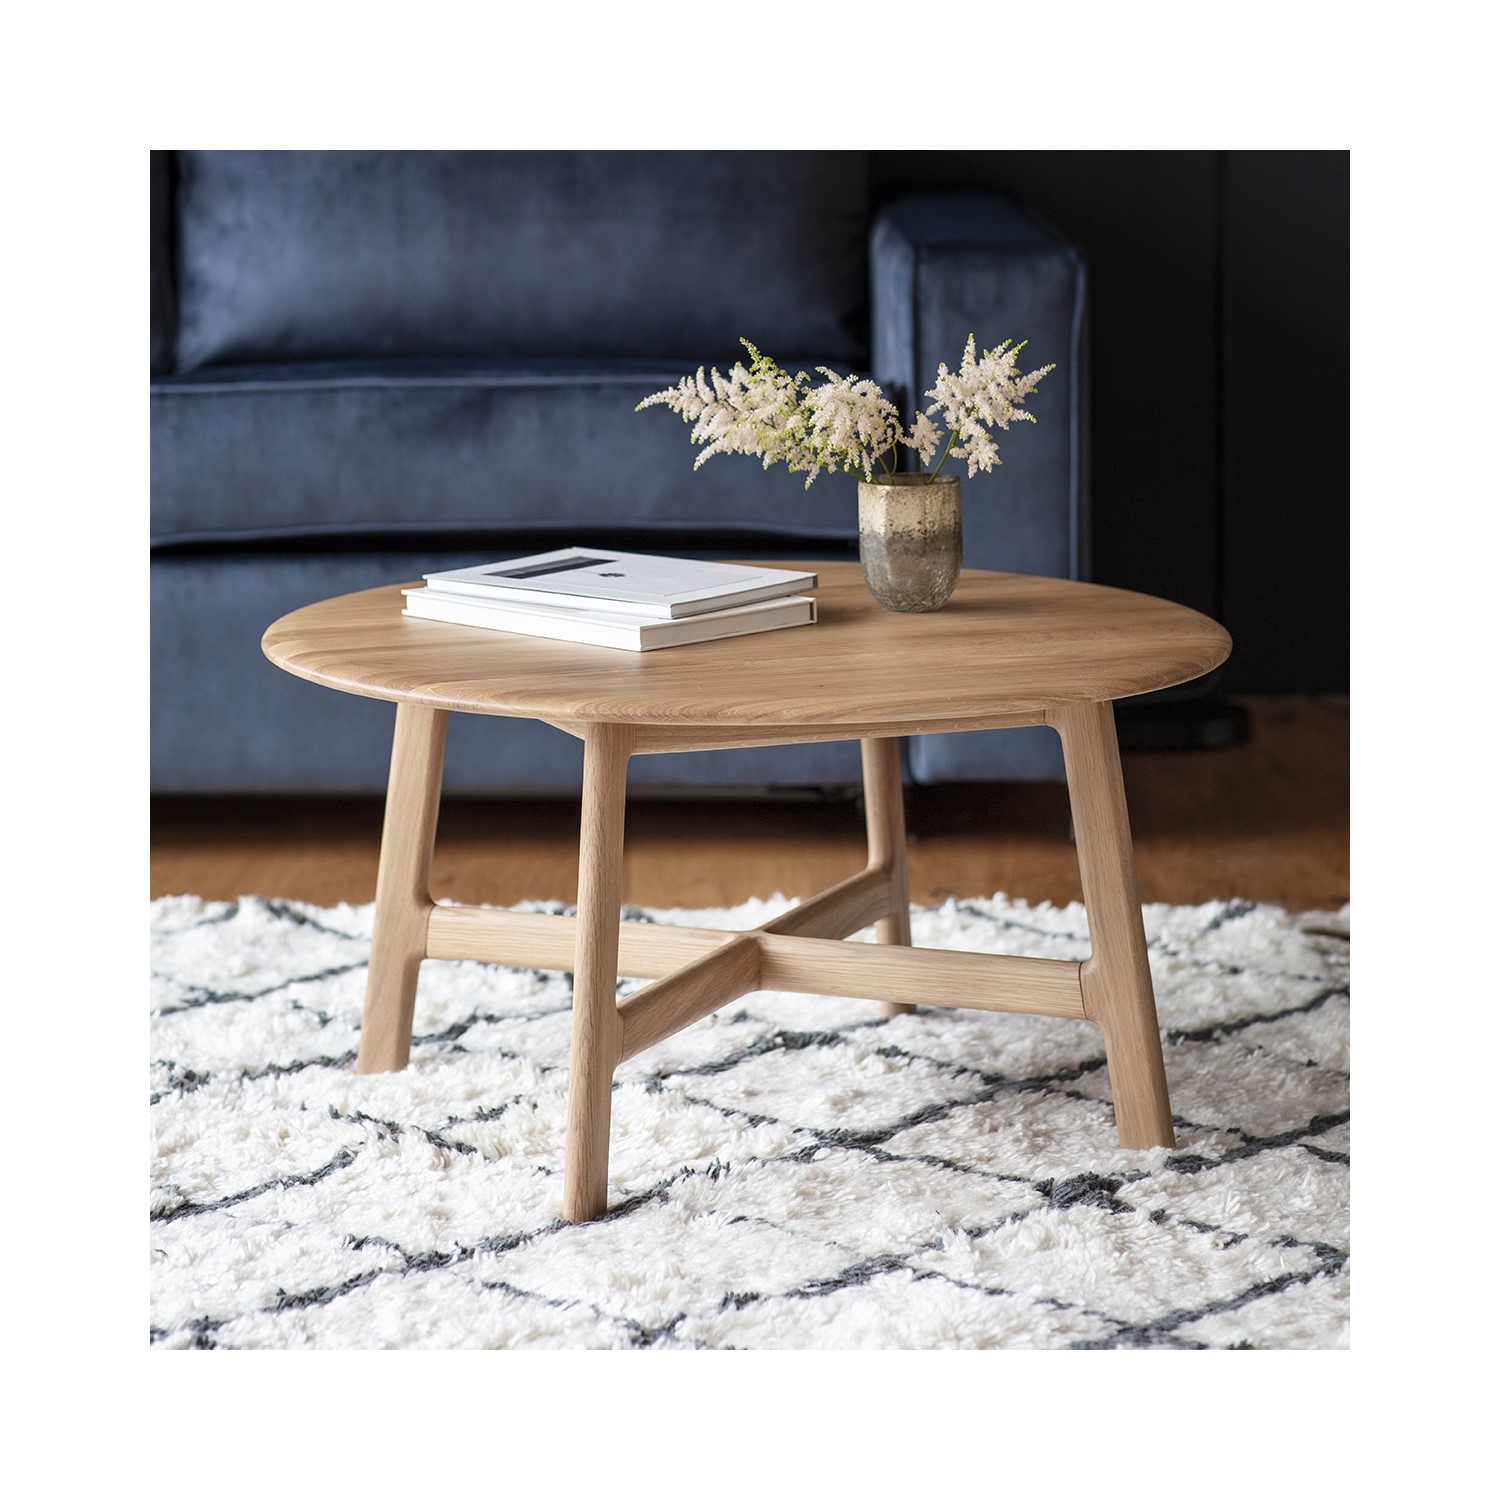 Photo of Madrid round coffee table - caspian house